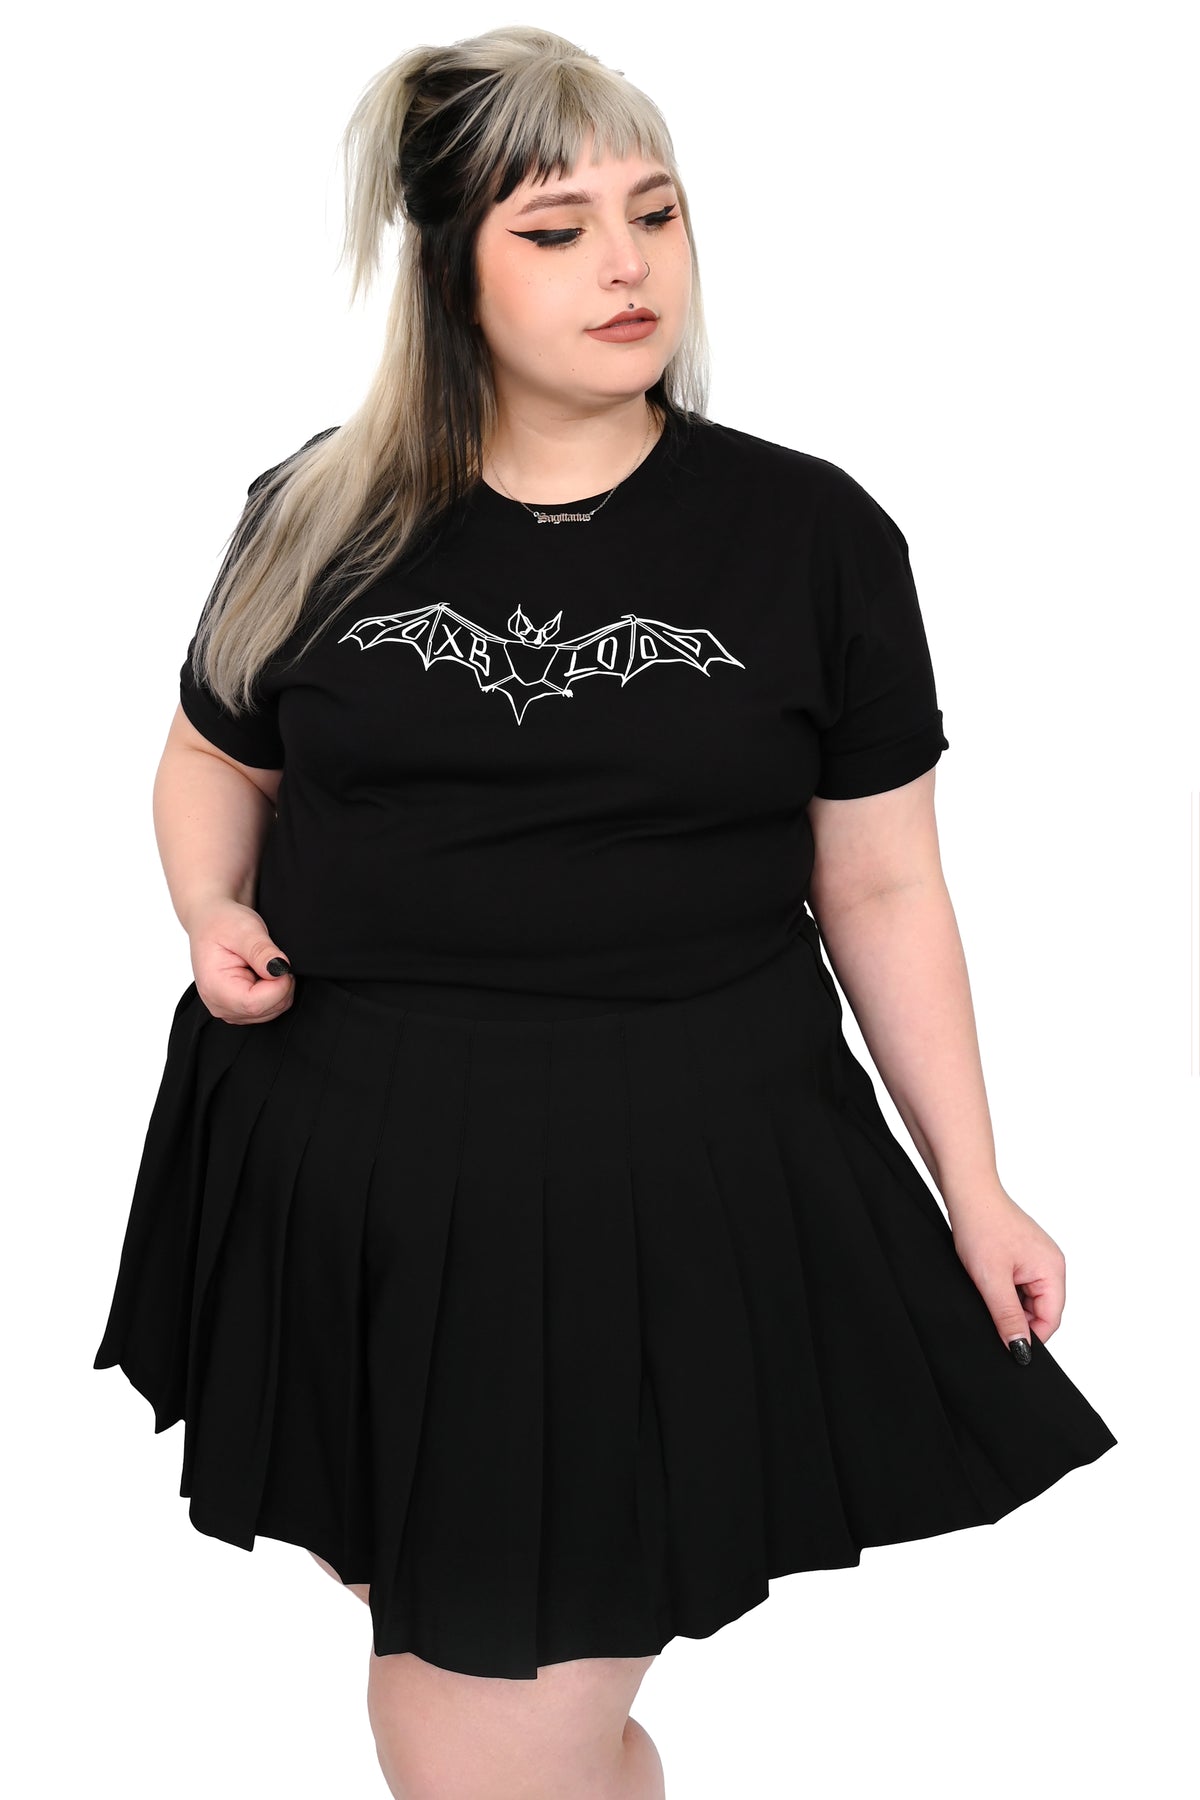 black t-shirt with "foxblood" printed on front in a bat outline